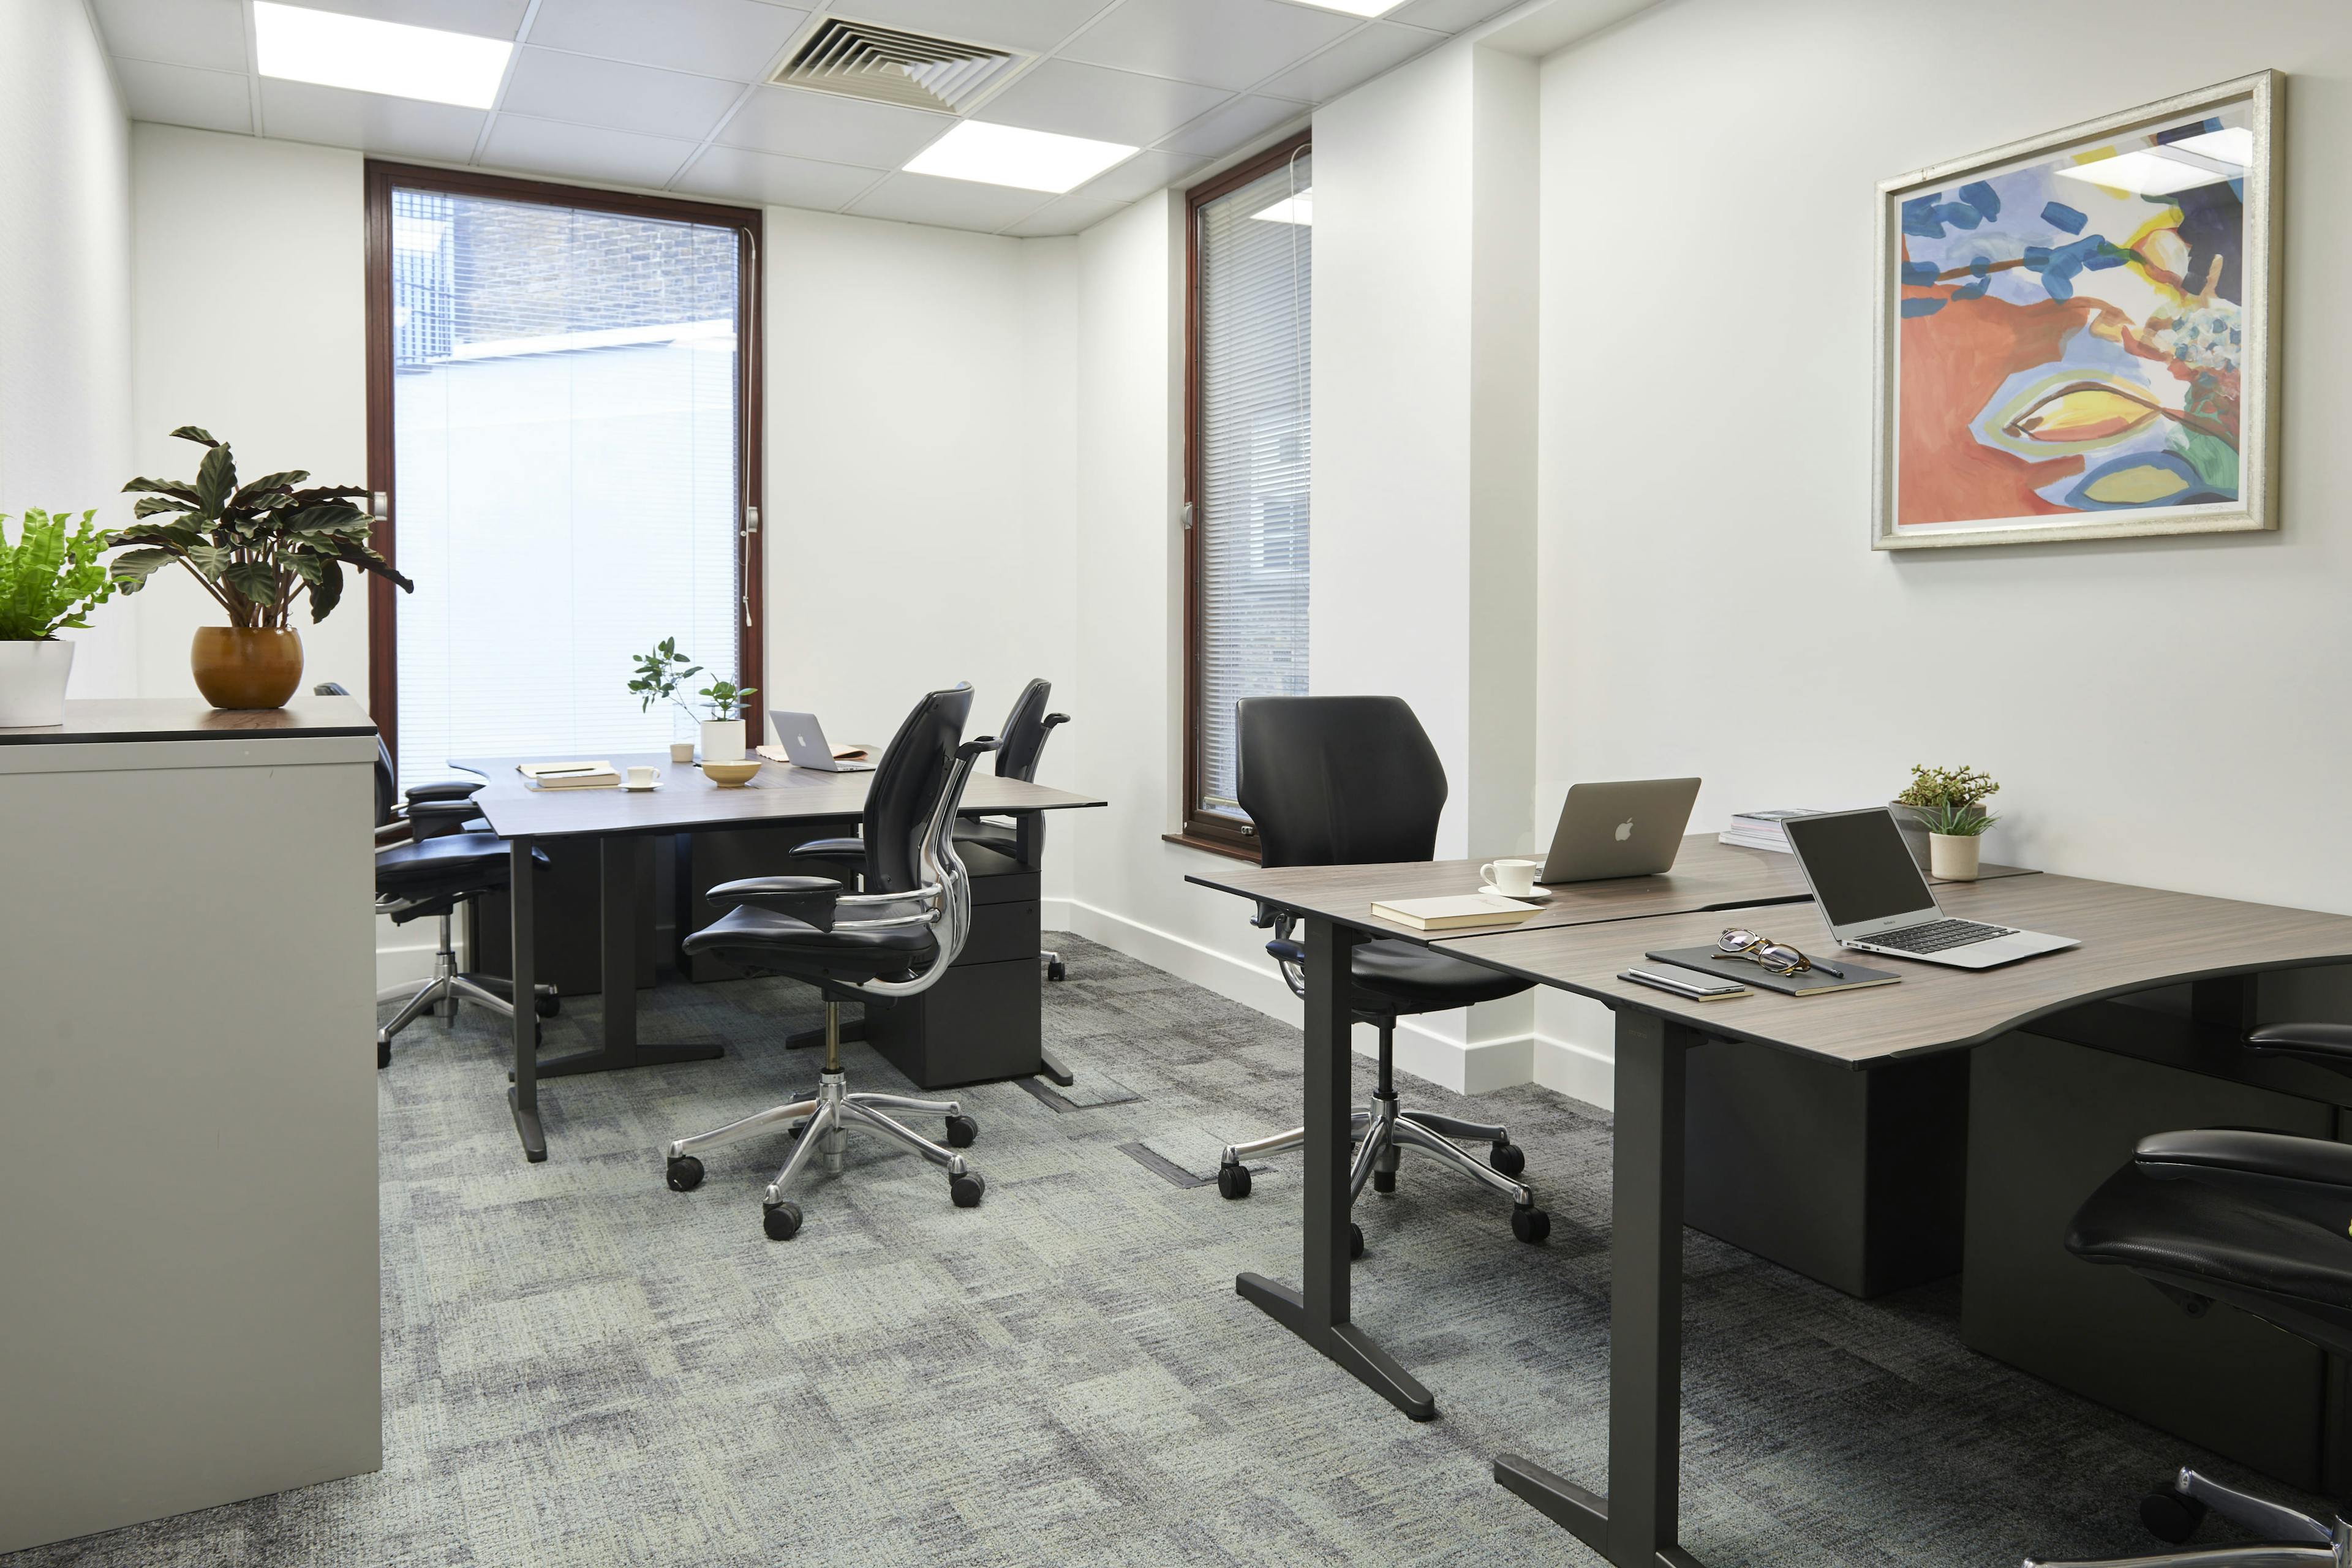 St Pauls – 14 Person Office – Snow Hill